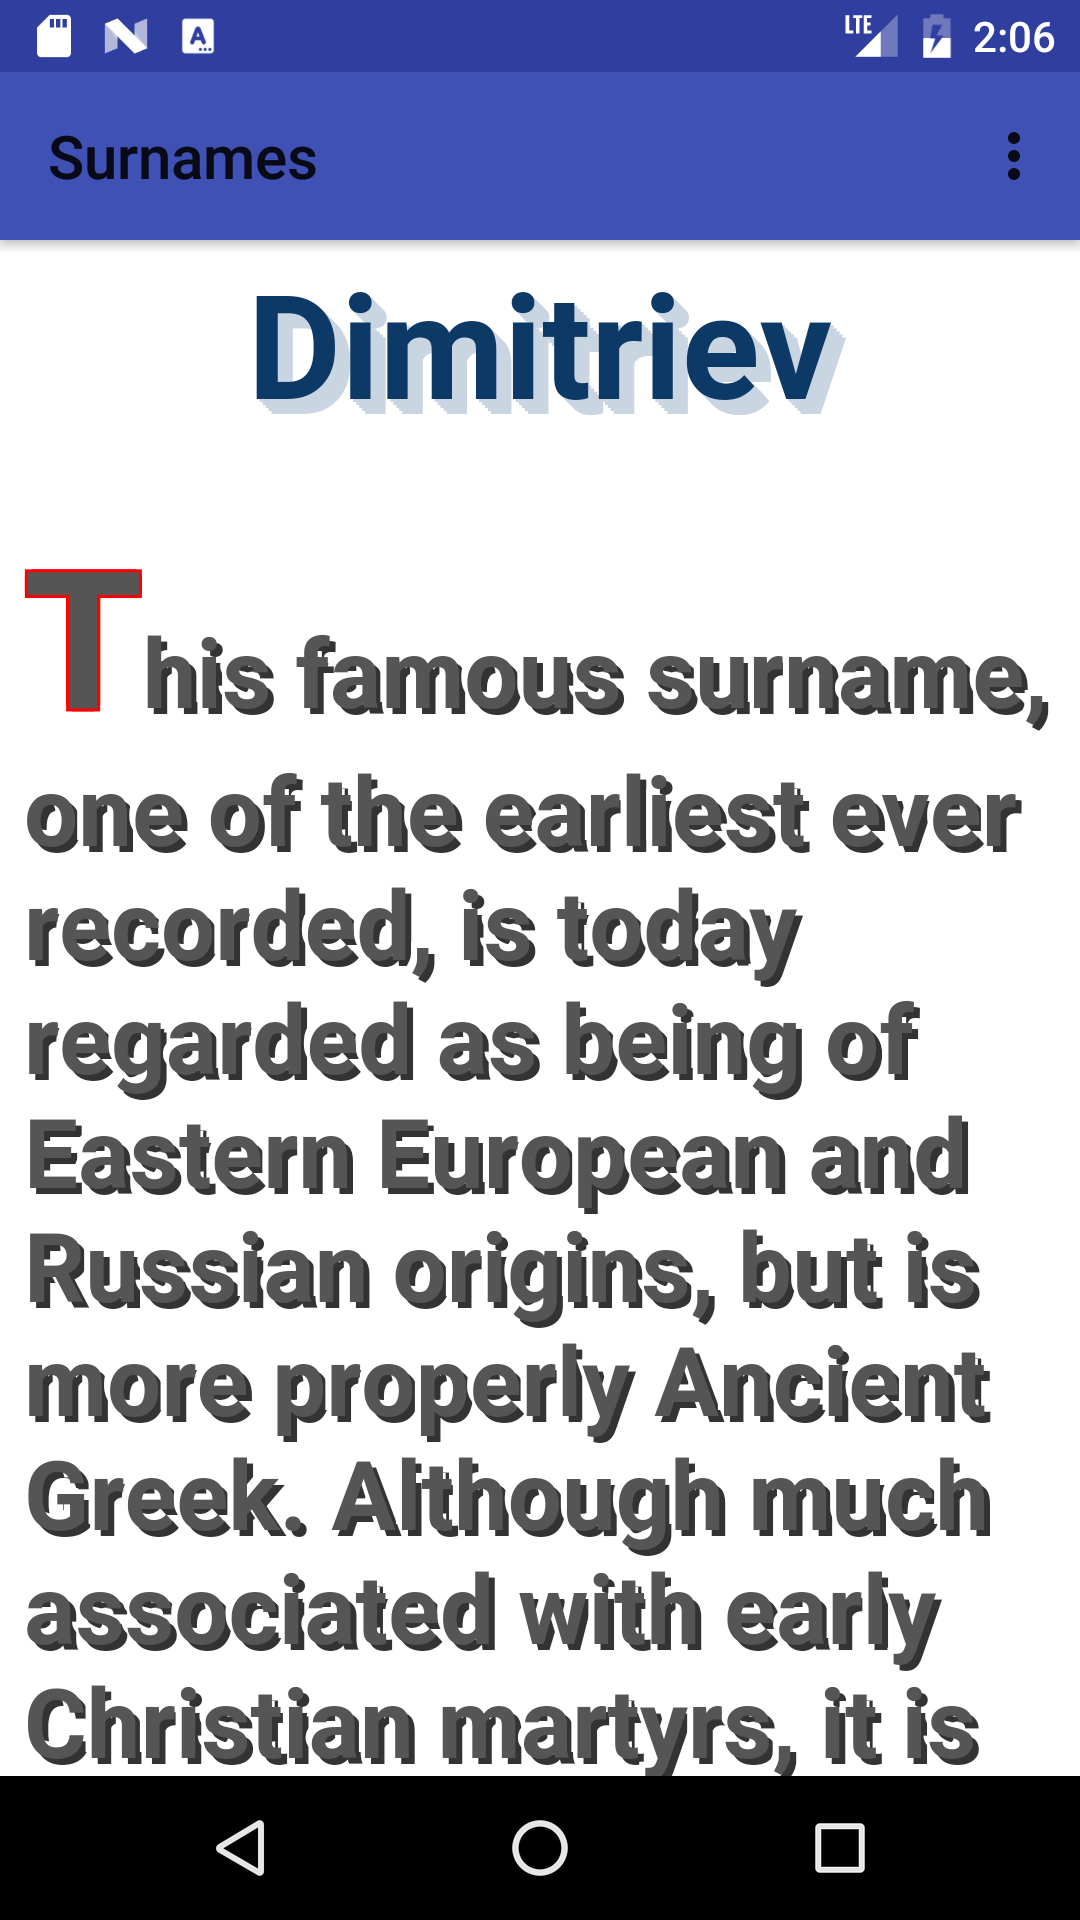 Meaning and origin of surnames